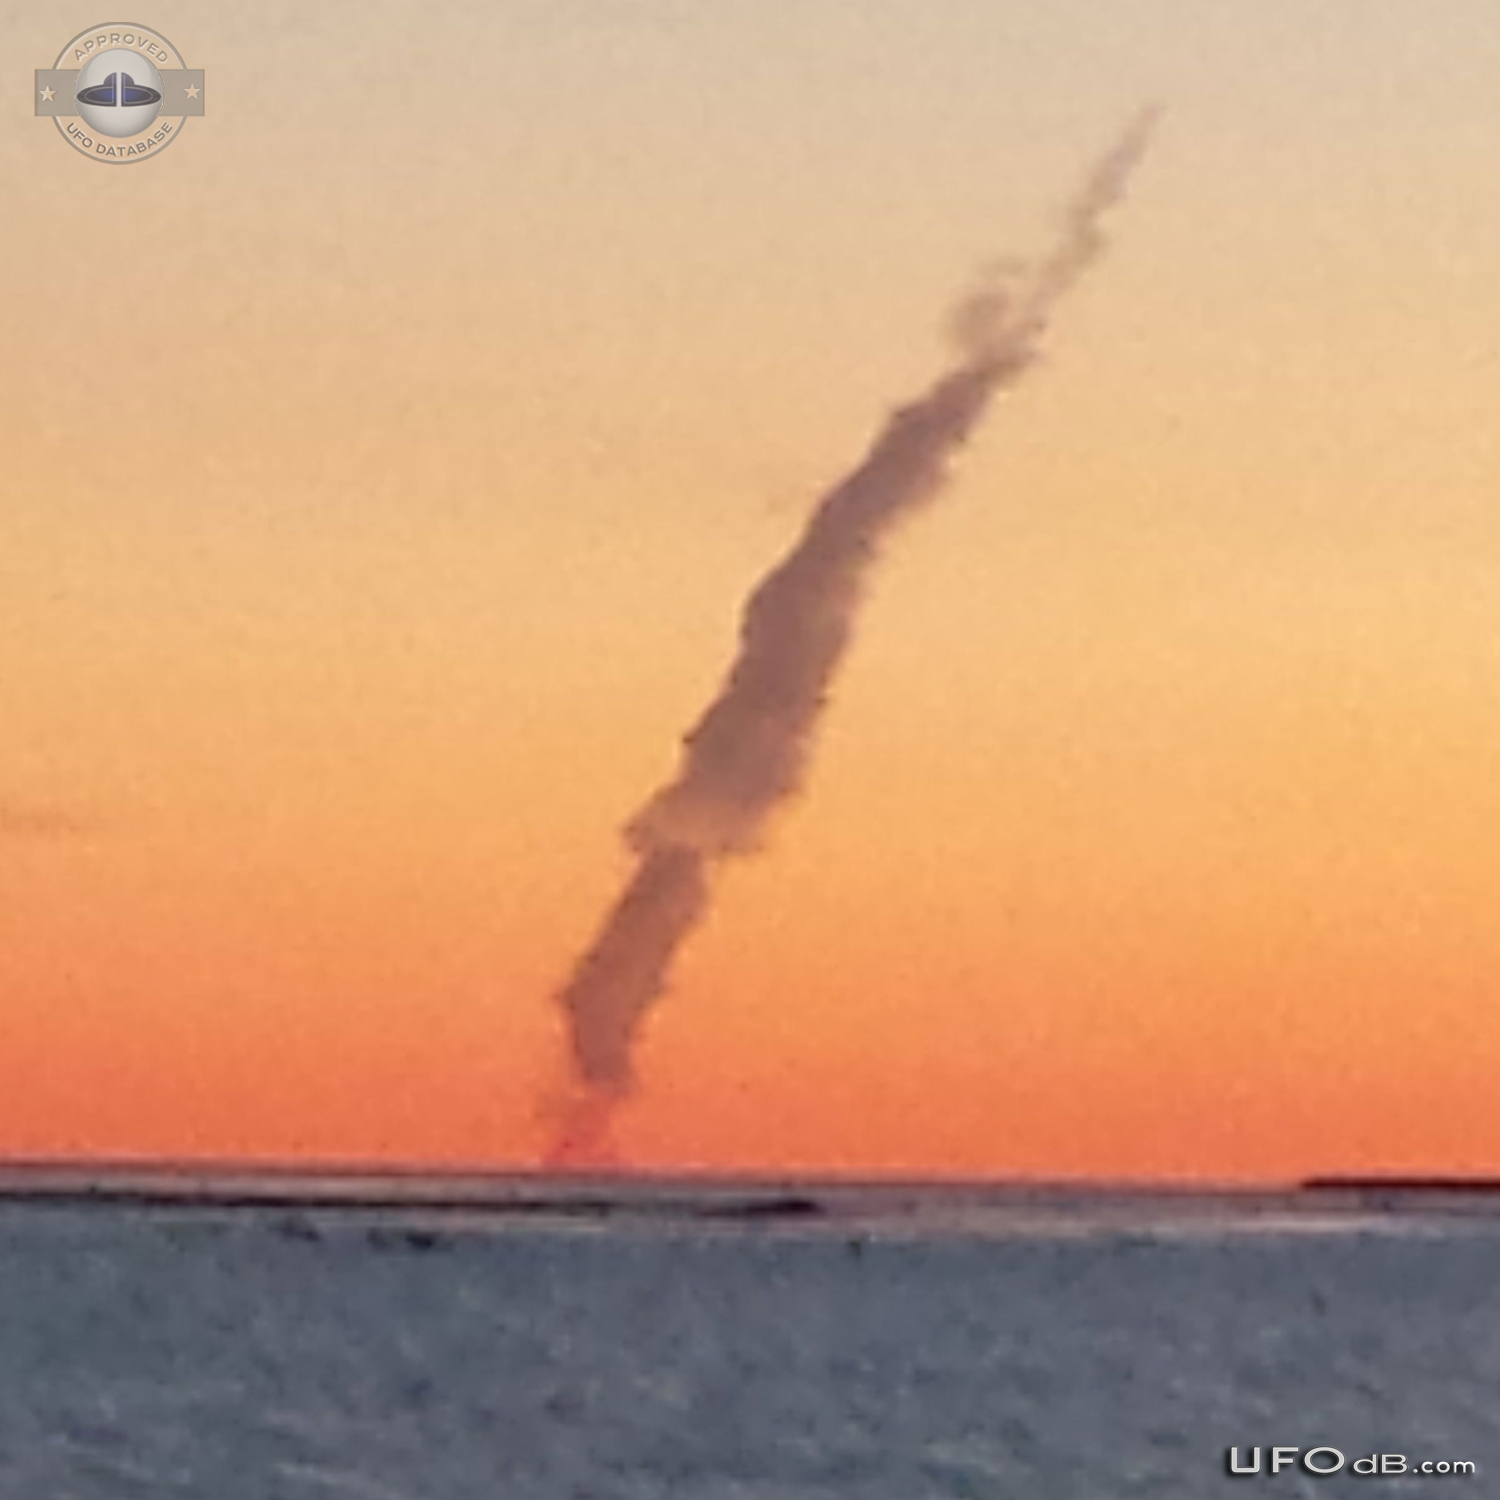 UFO leave the water straight up out in 5 seconds Alakanuk, Alaska USA UFO Picture #621-2